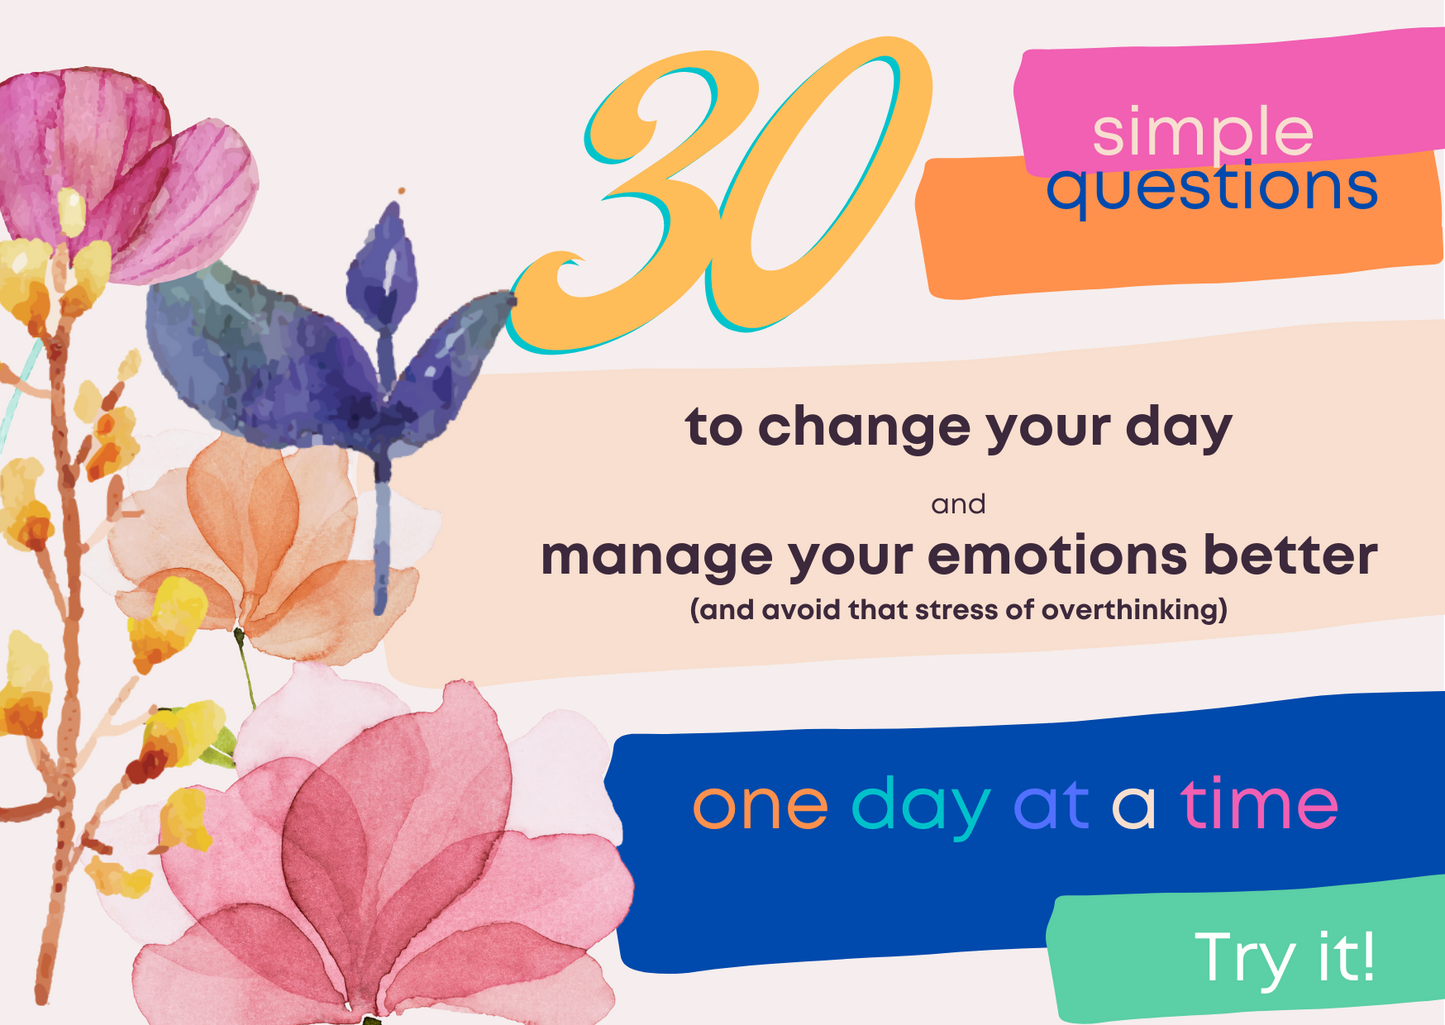 30 Simple Questions to change how you feel about your day (and manage your emotions better) - SLOW ANIMATION VERSION